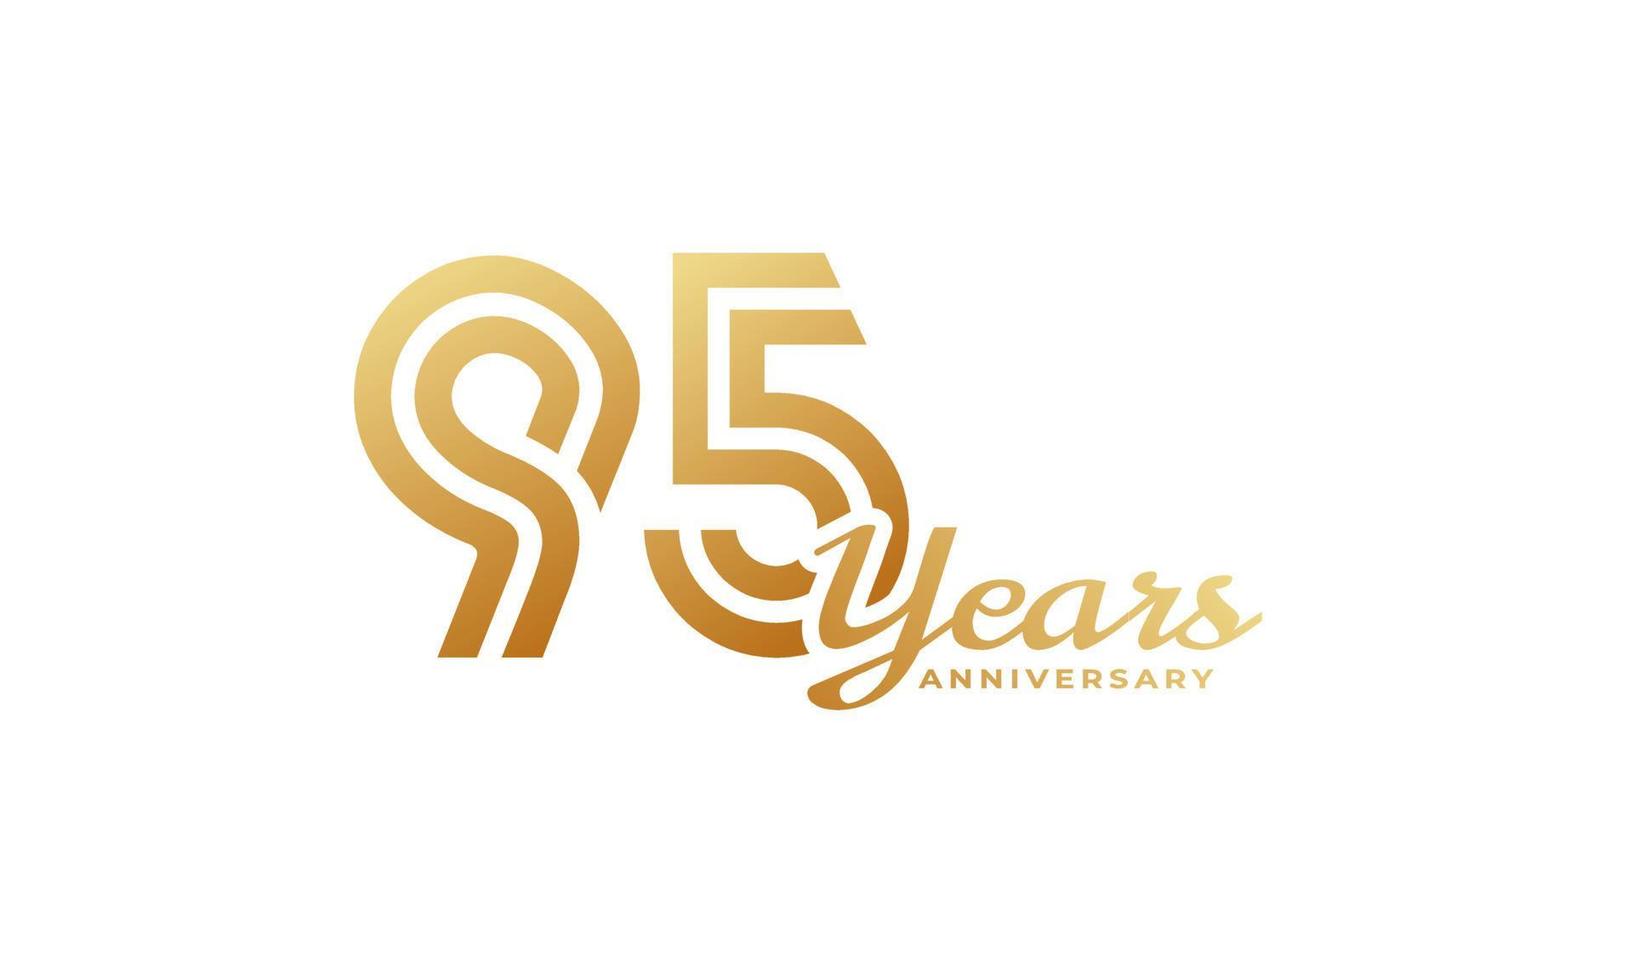 95 Year Anniversary Celebration with Handwriting Golden Color for Celebration Event, Wedding, Greeting card, and Invitation Isolated on White Background vector